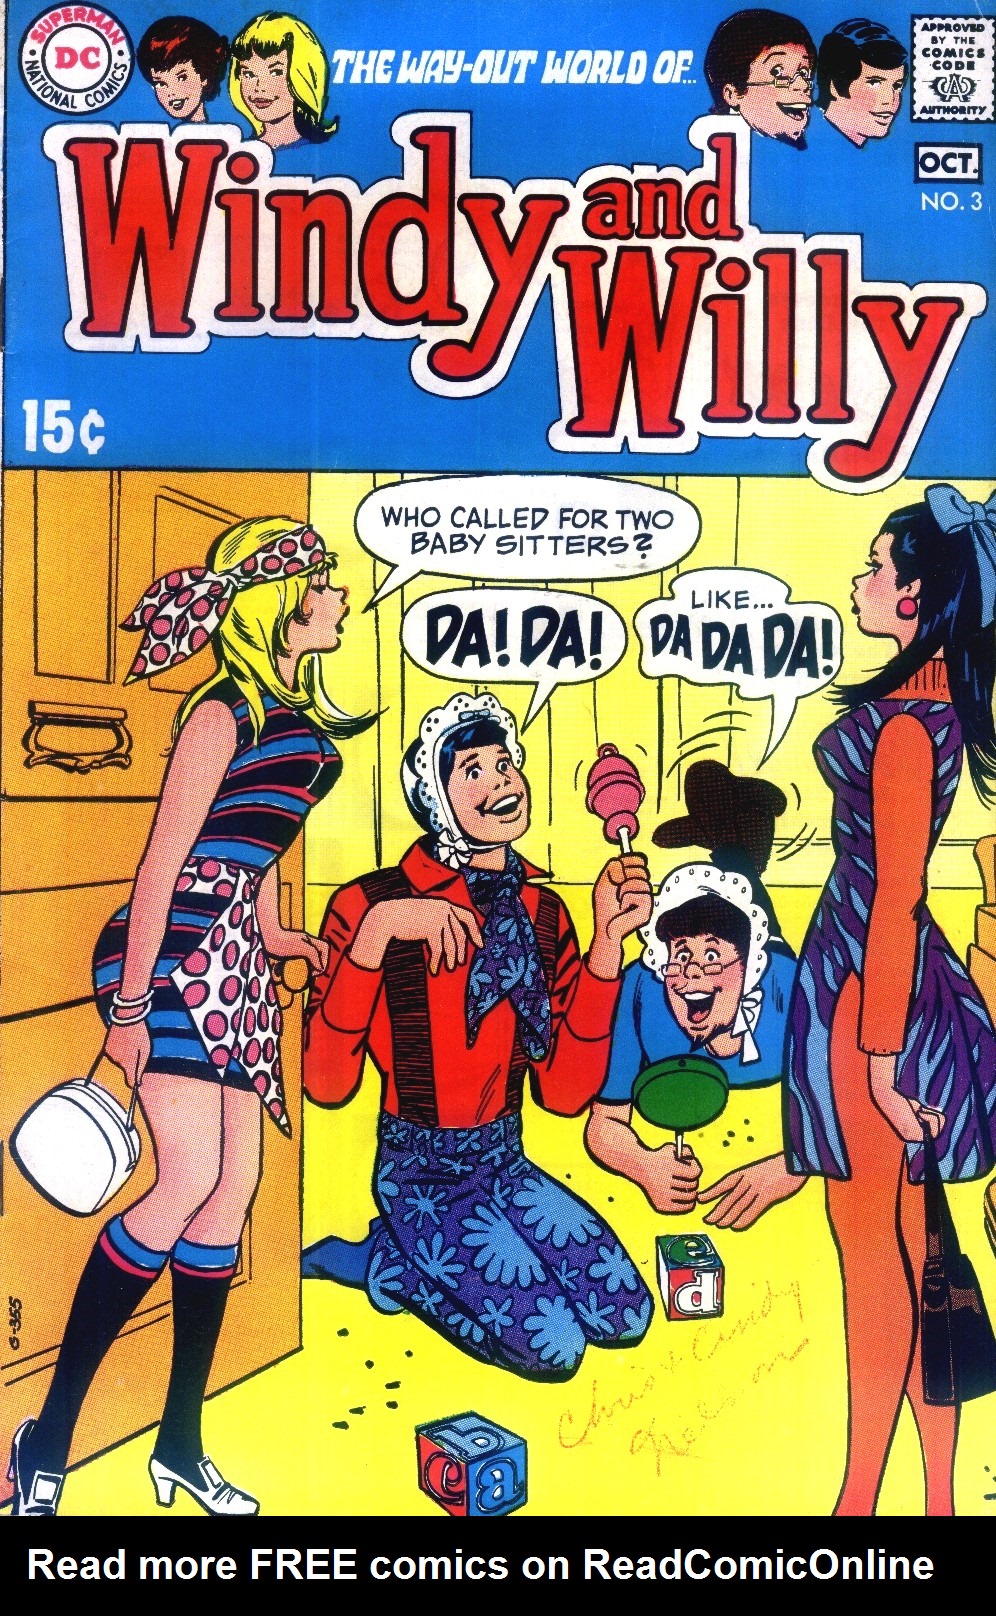 Read online Windy and Willy comic -  Issue #3 - 1